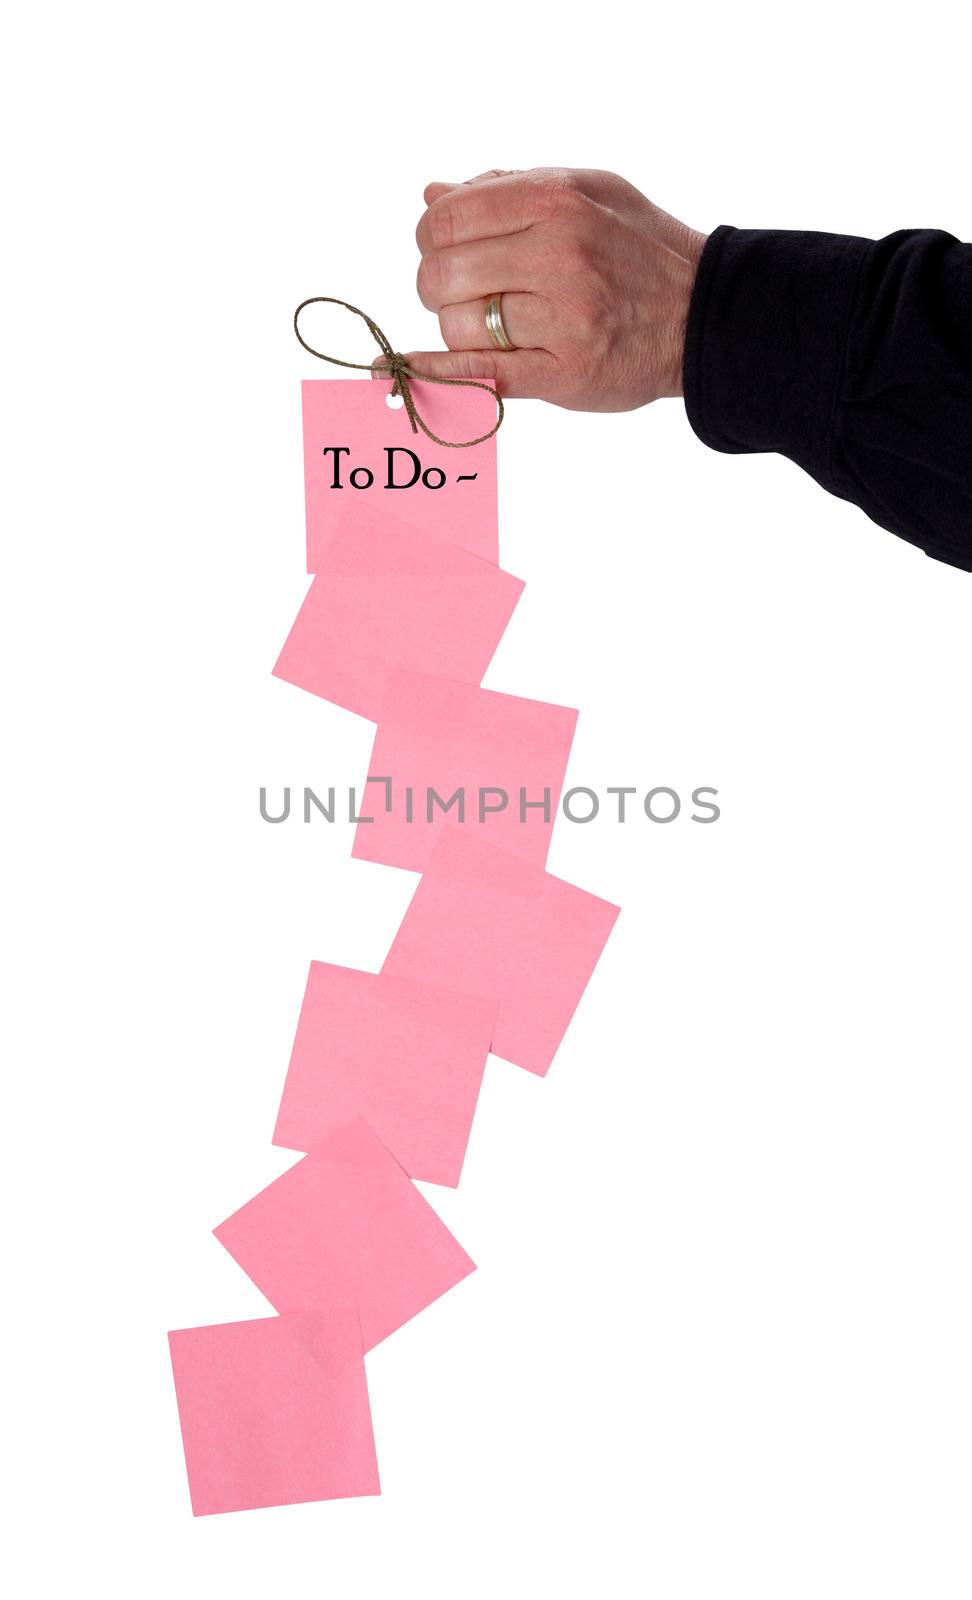 Household organization takes careful planning to be successful with a string of sticky notes on a white background